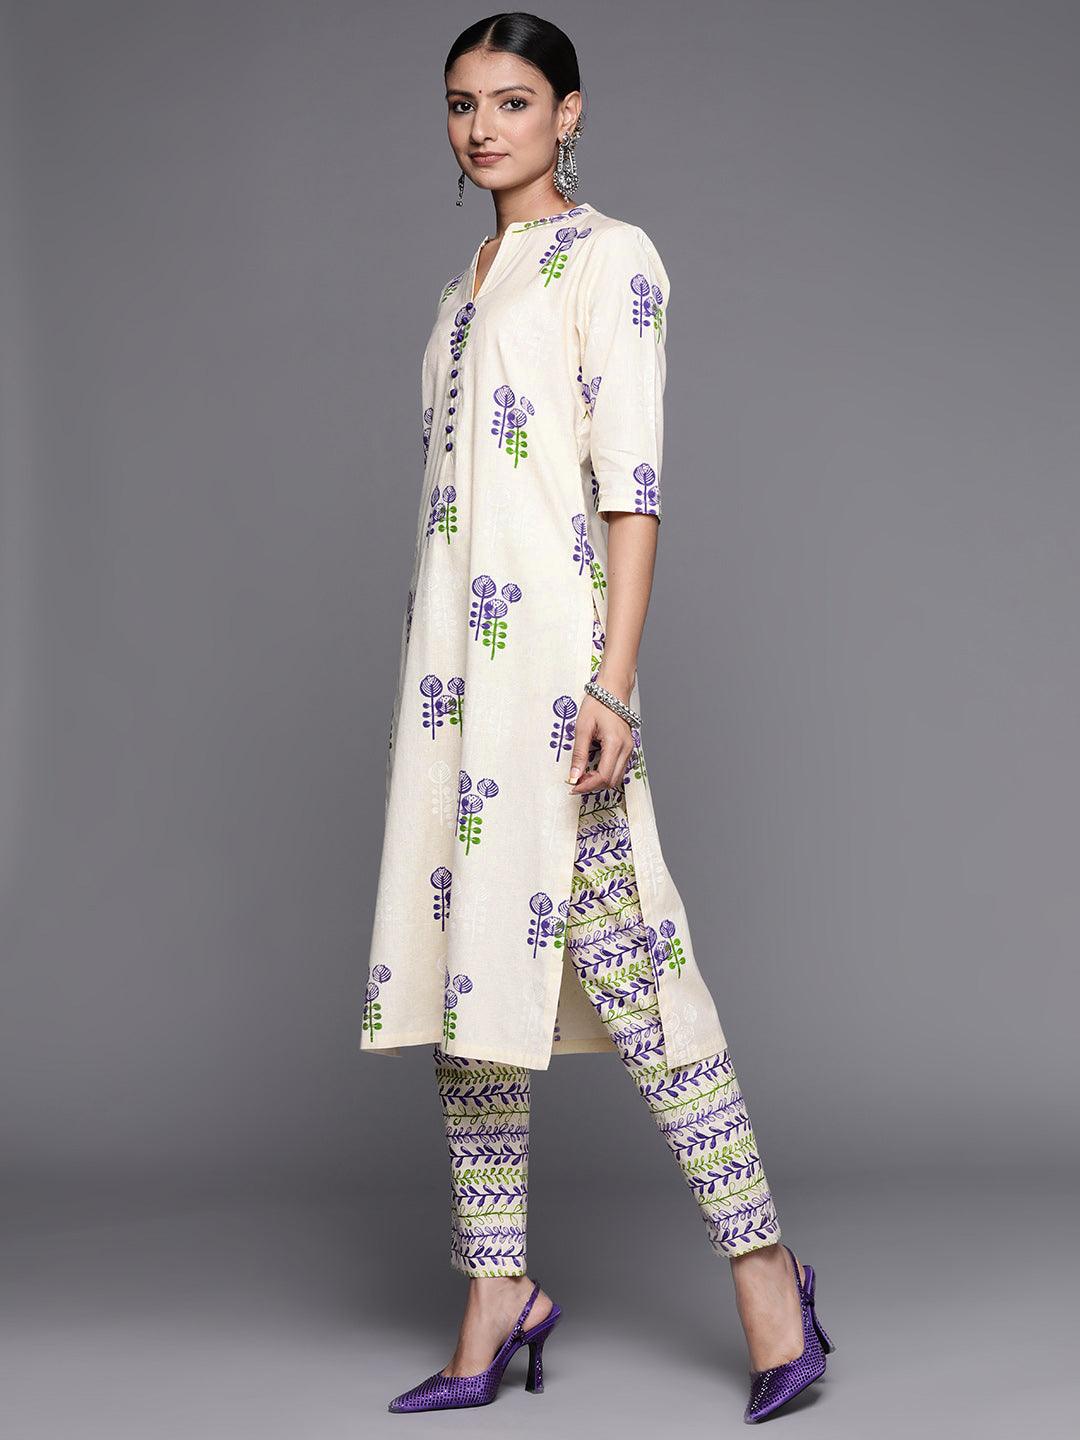 HOW TO STYLE A WHITE KURTI IN DIFFERENT WAYS